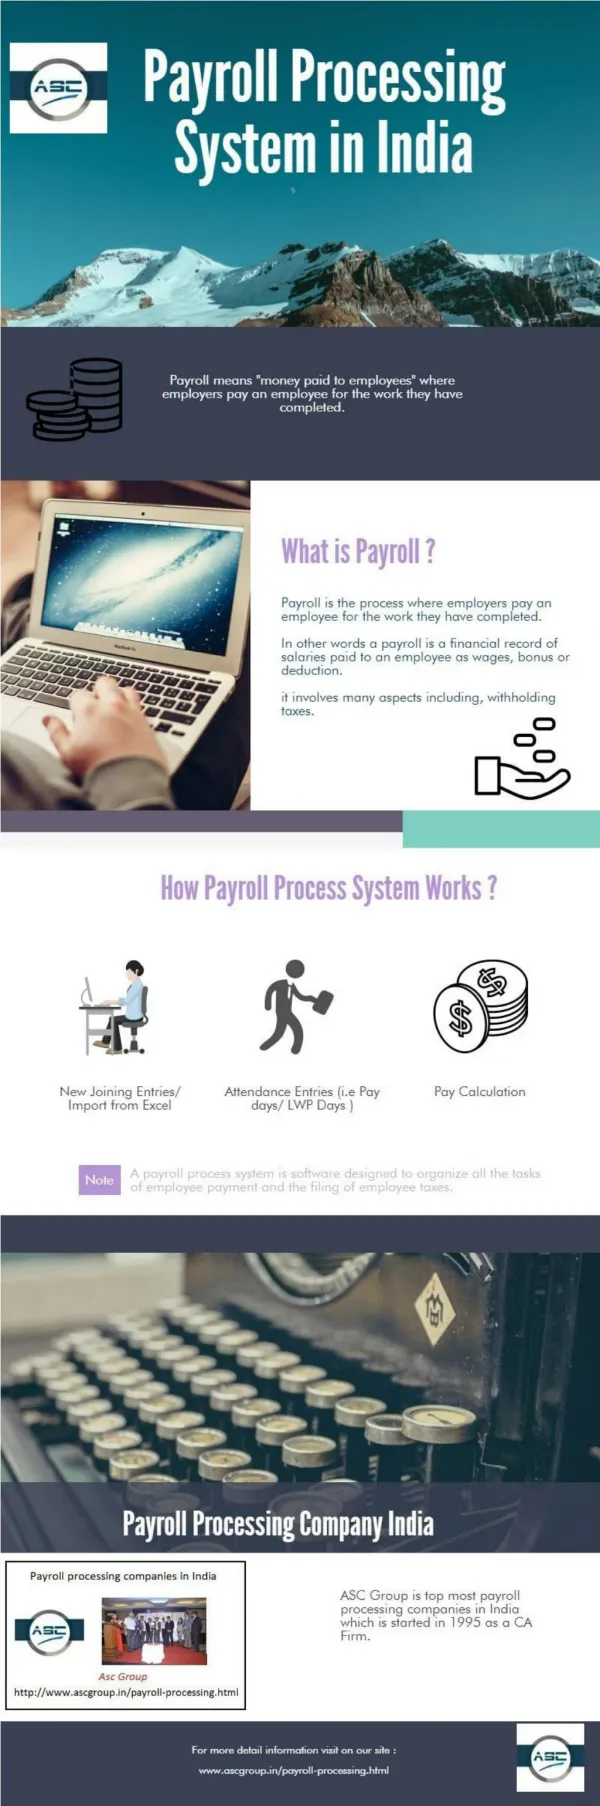 Payroll Processing Outsourcing Services in India by ASC Group